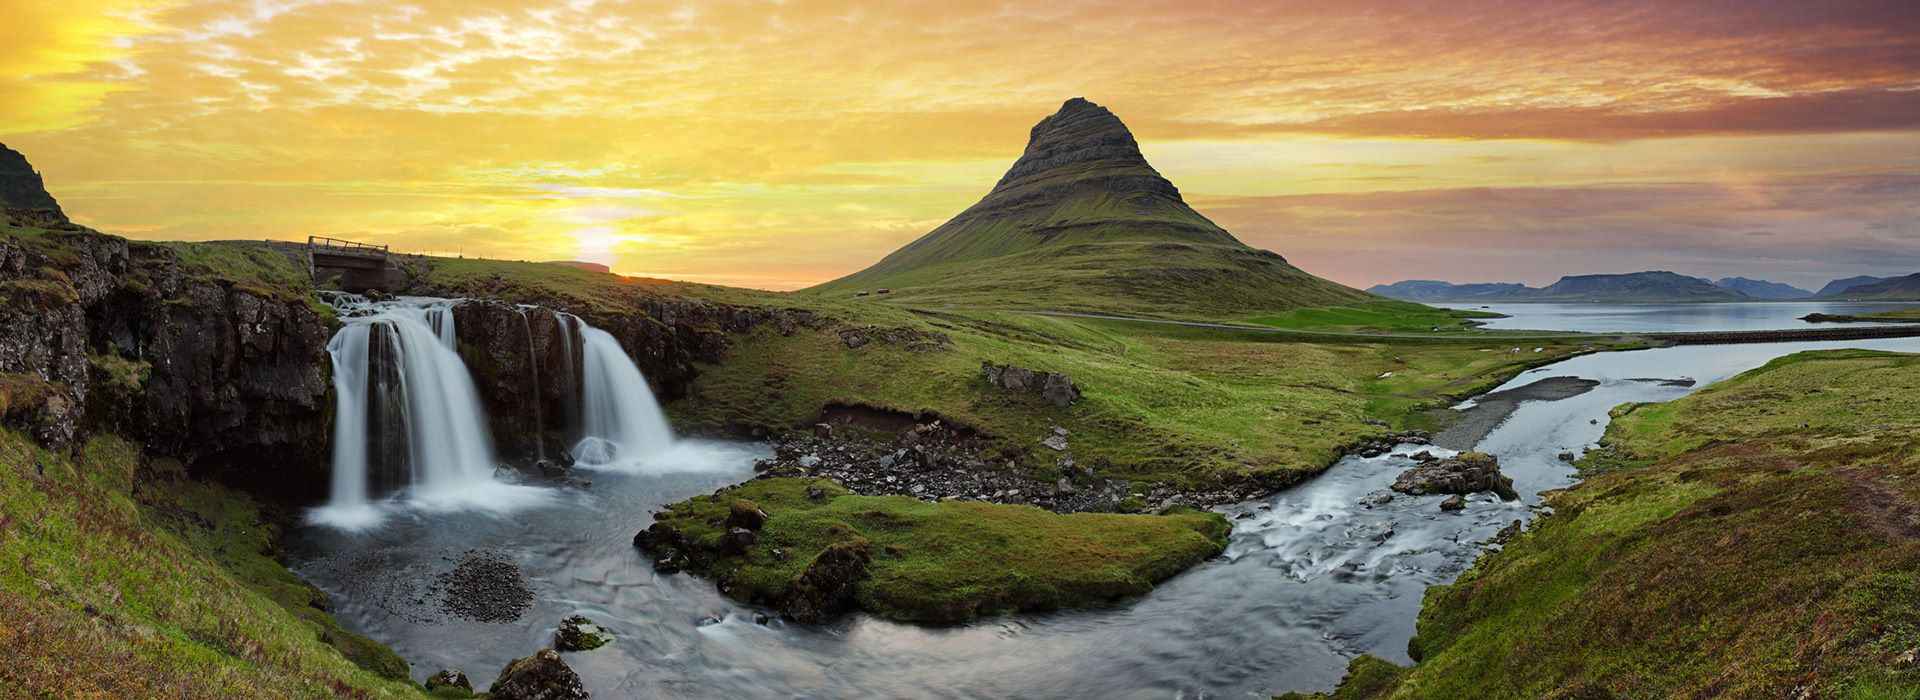 Iceland Travel Guide - Travel Insights and Tips